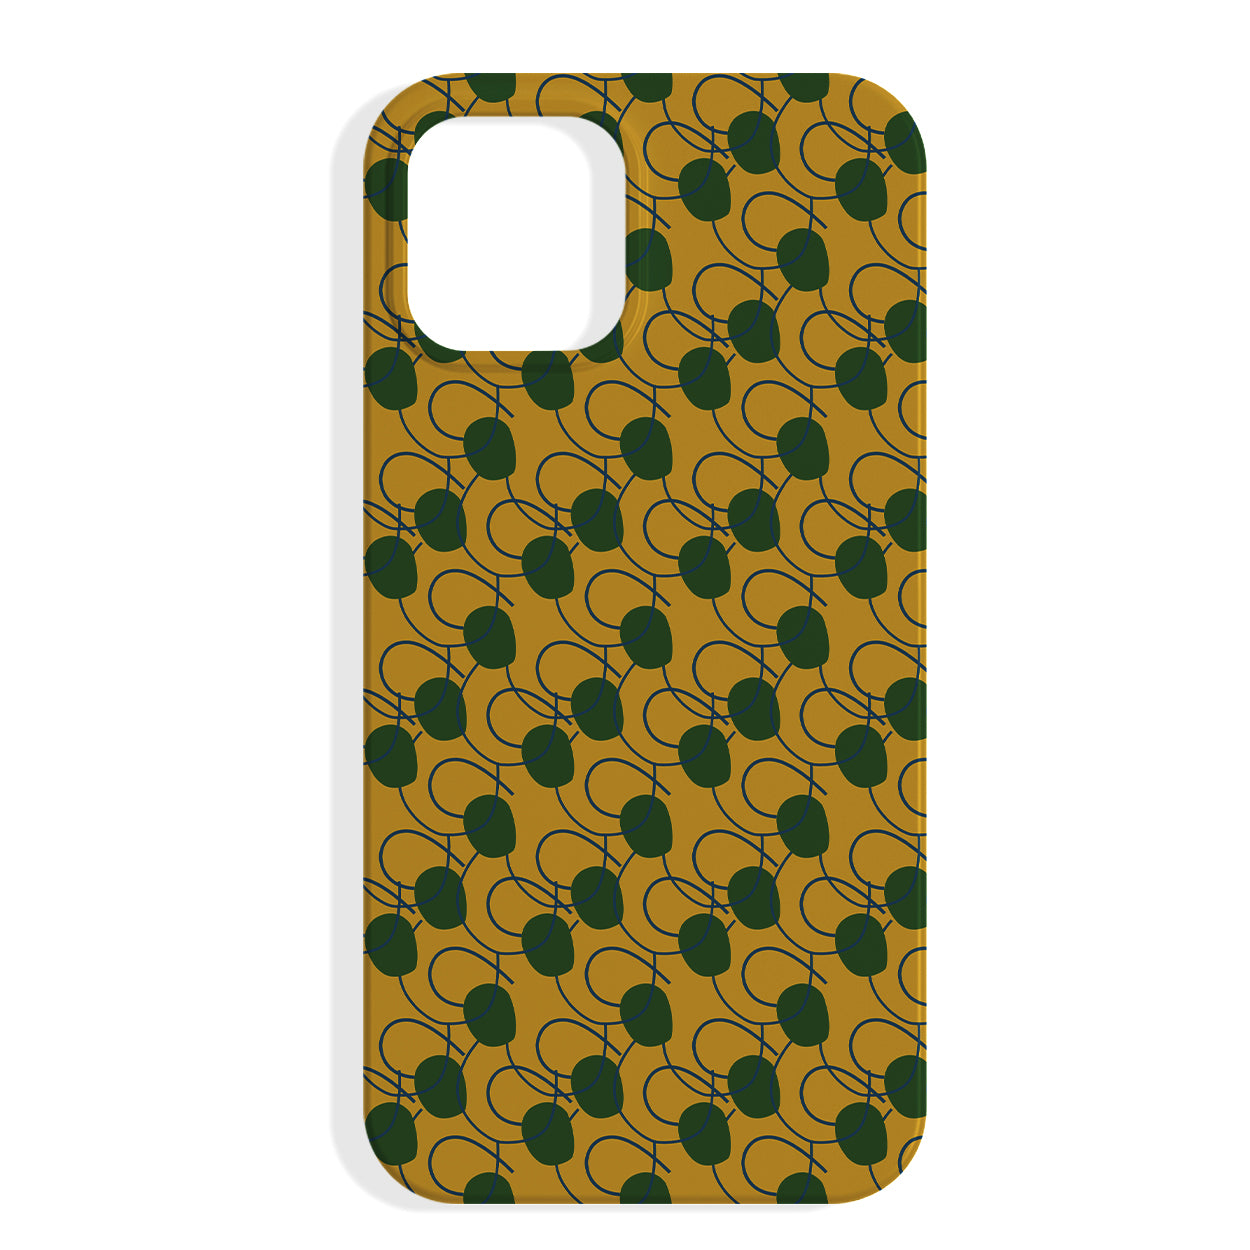 Mustard cover with abstract pattern